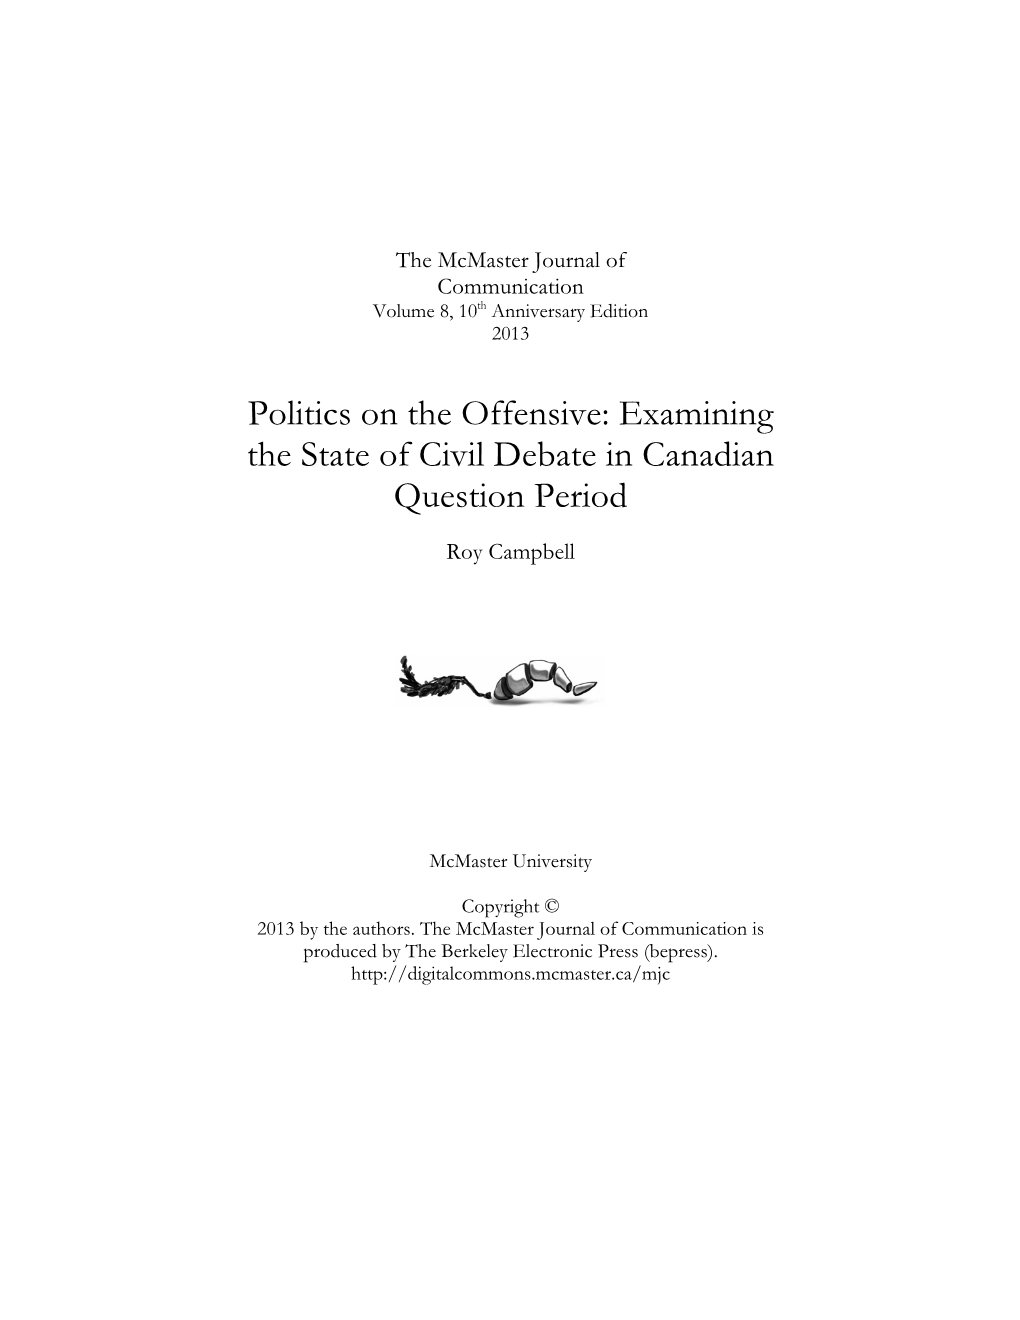 Politics on the Offensive: Examining the State of Civil Debate in Canadian Question Period